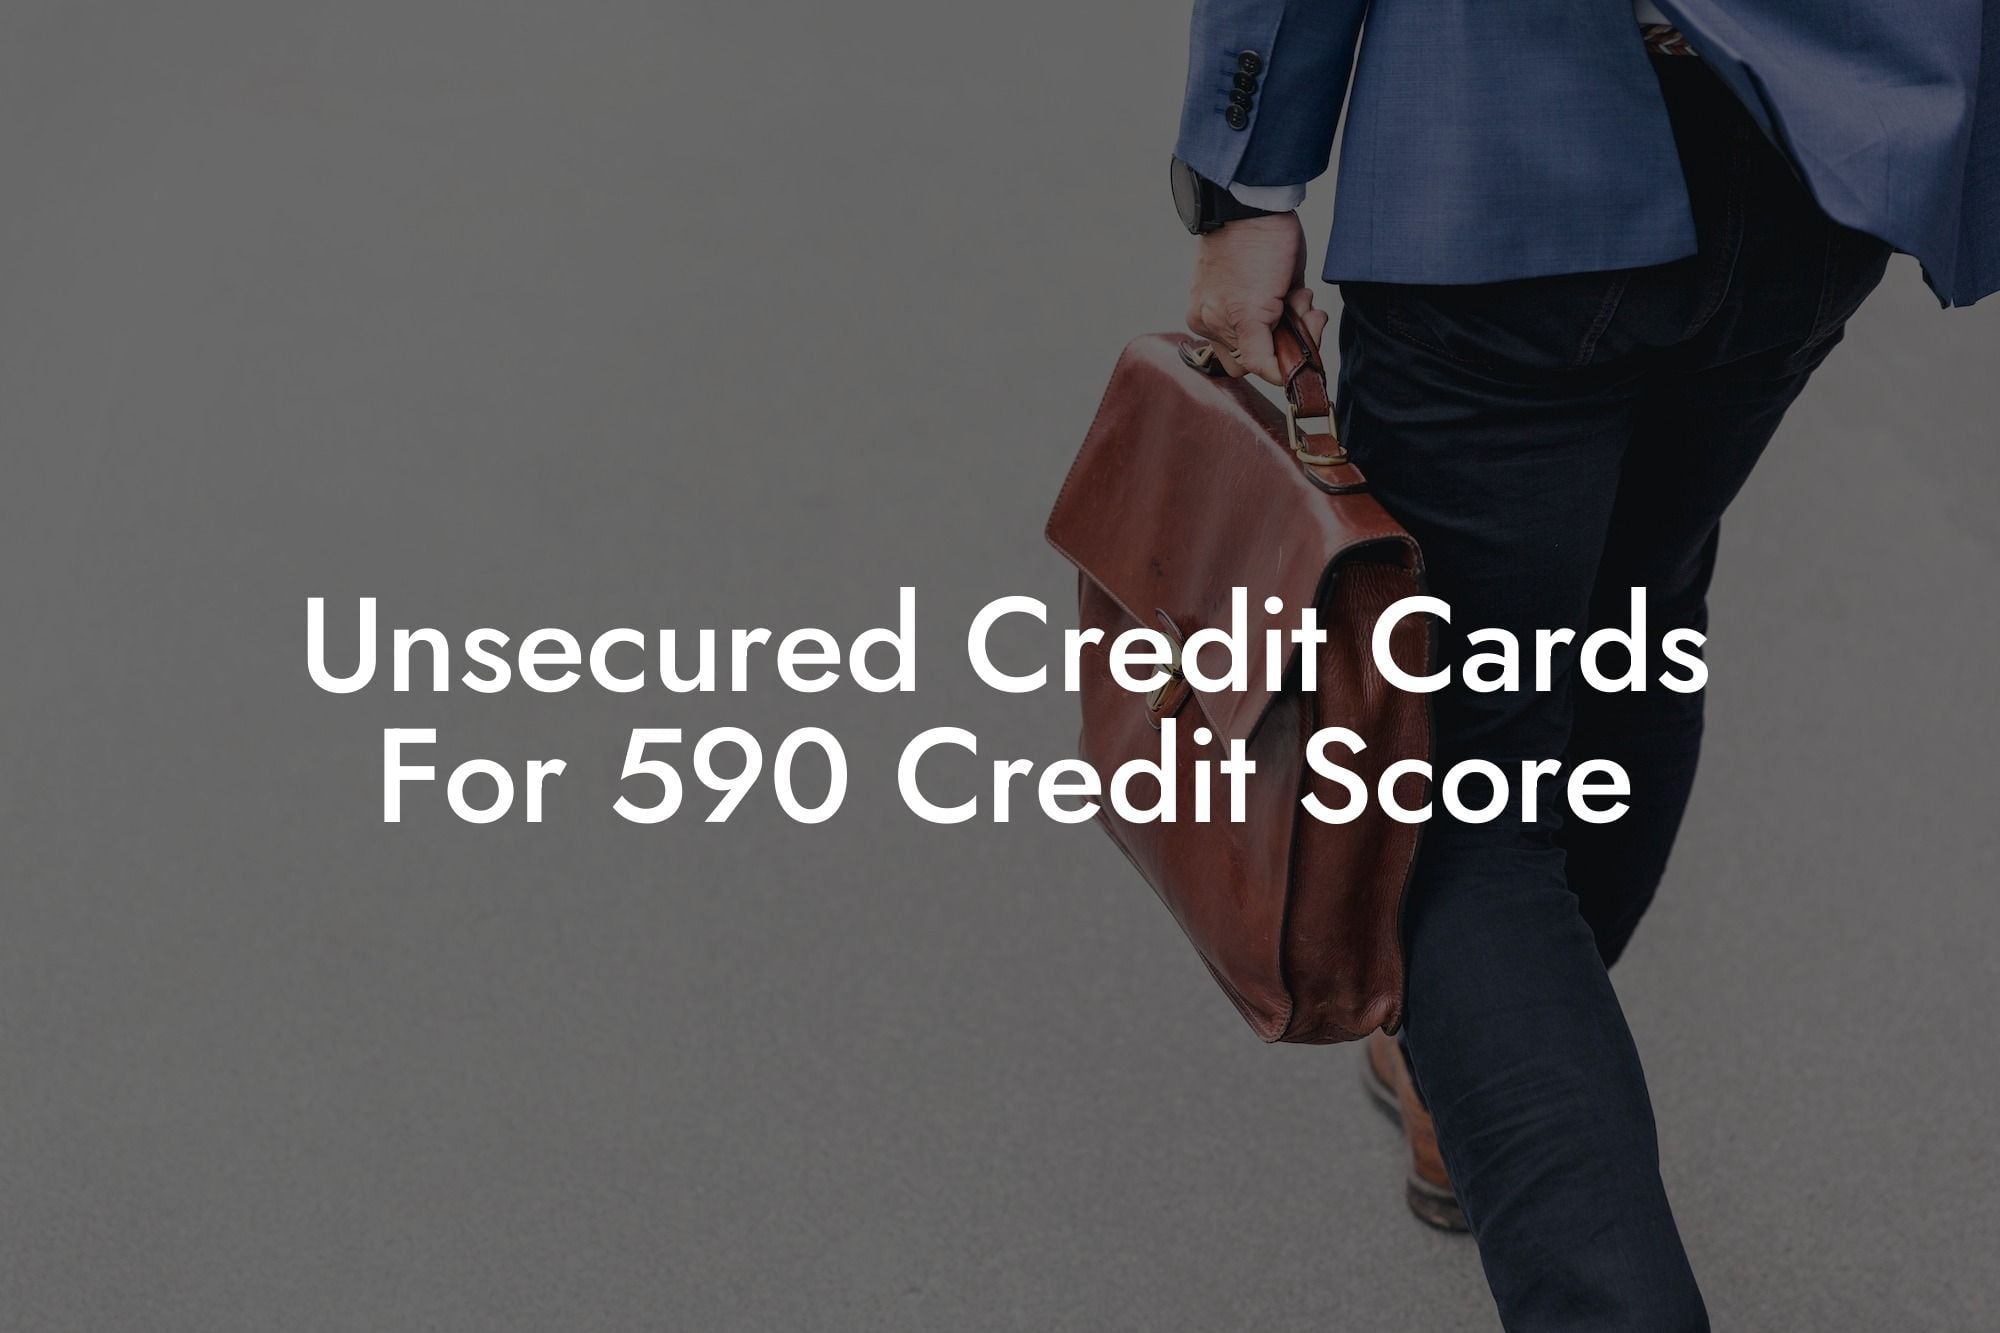 Unsecured Credit Cards For 590 Credit Score